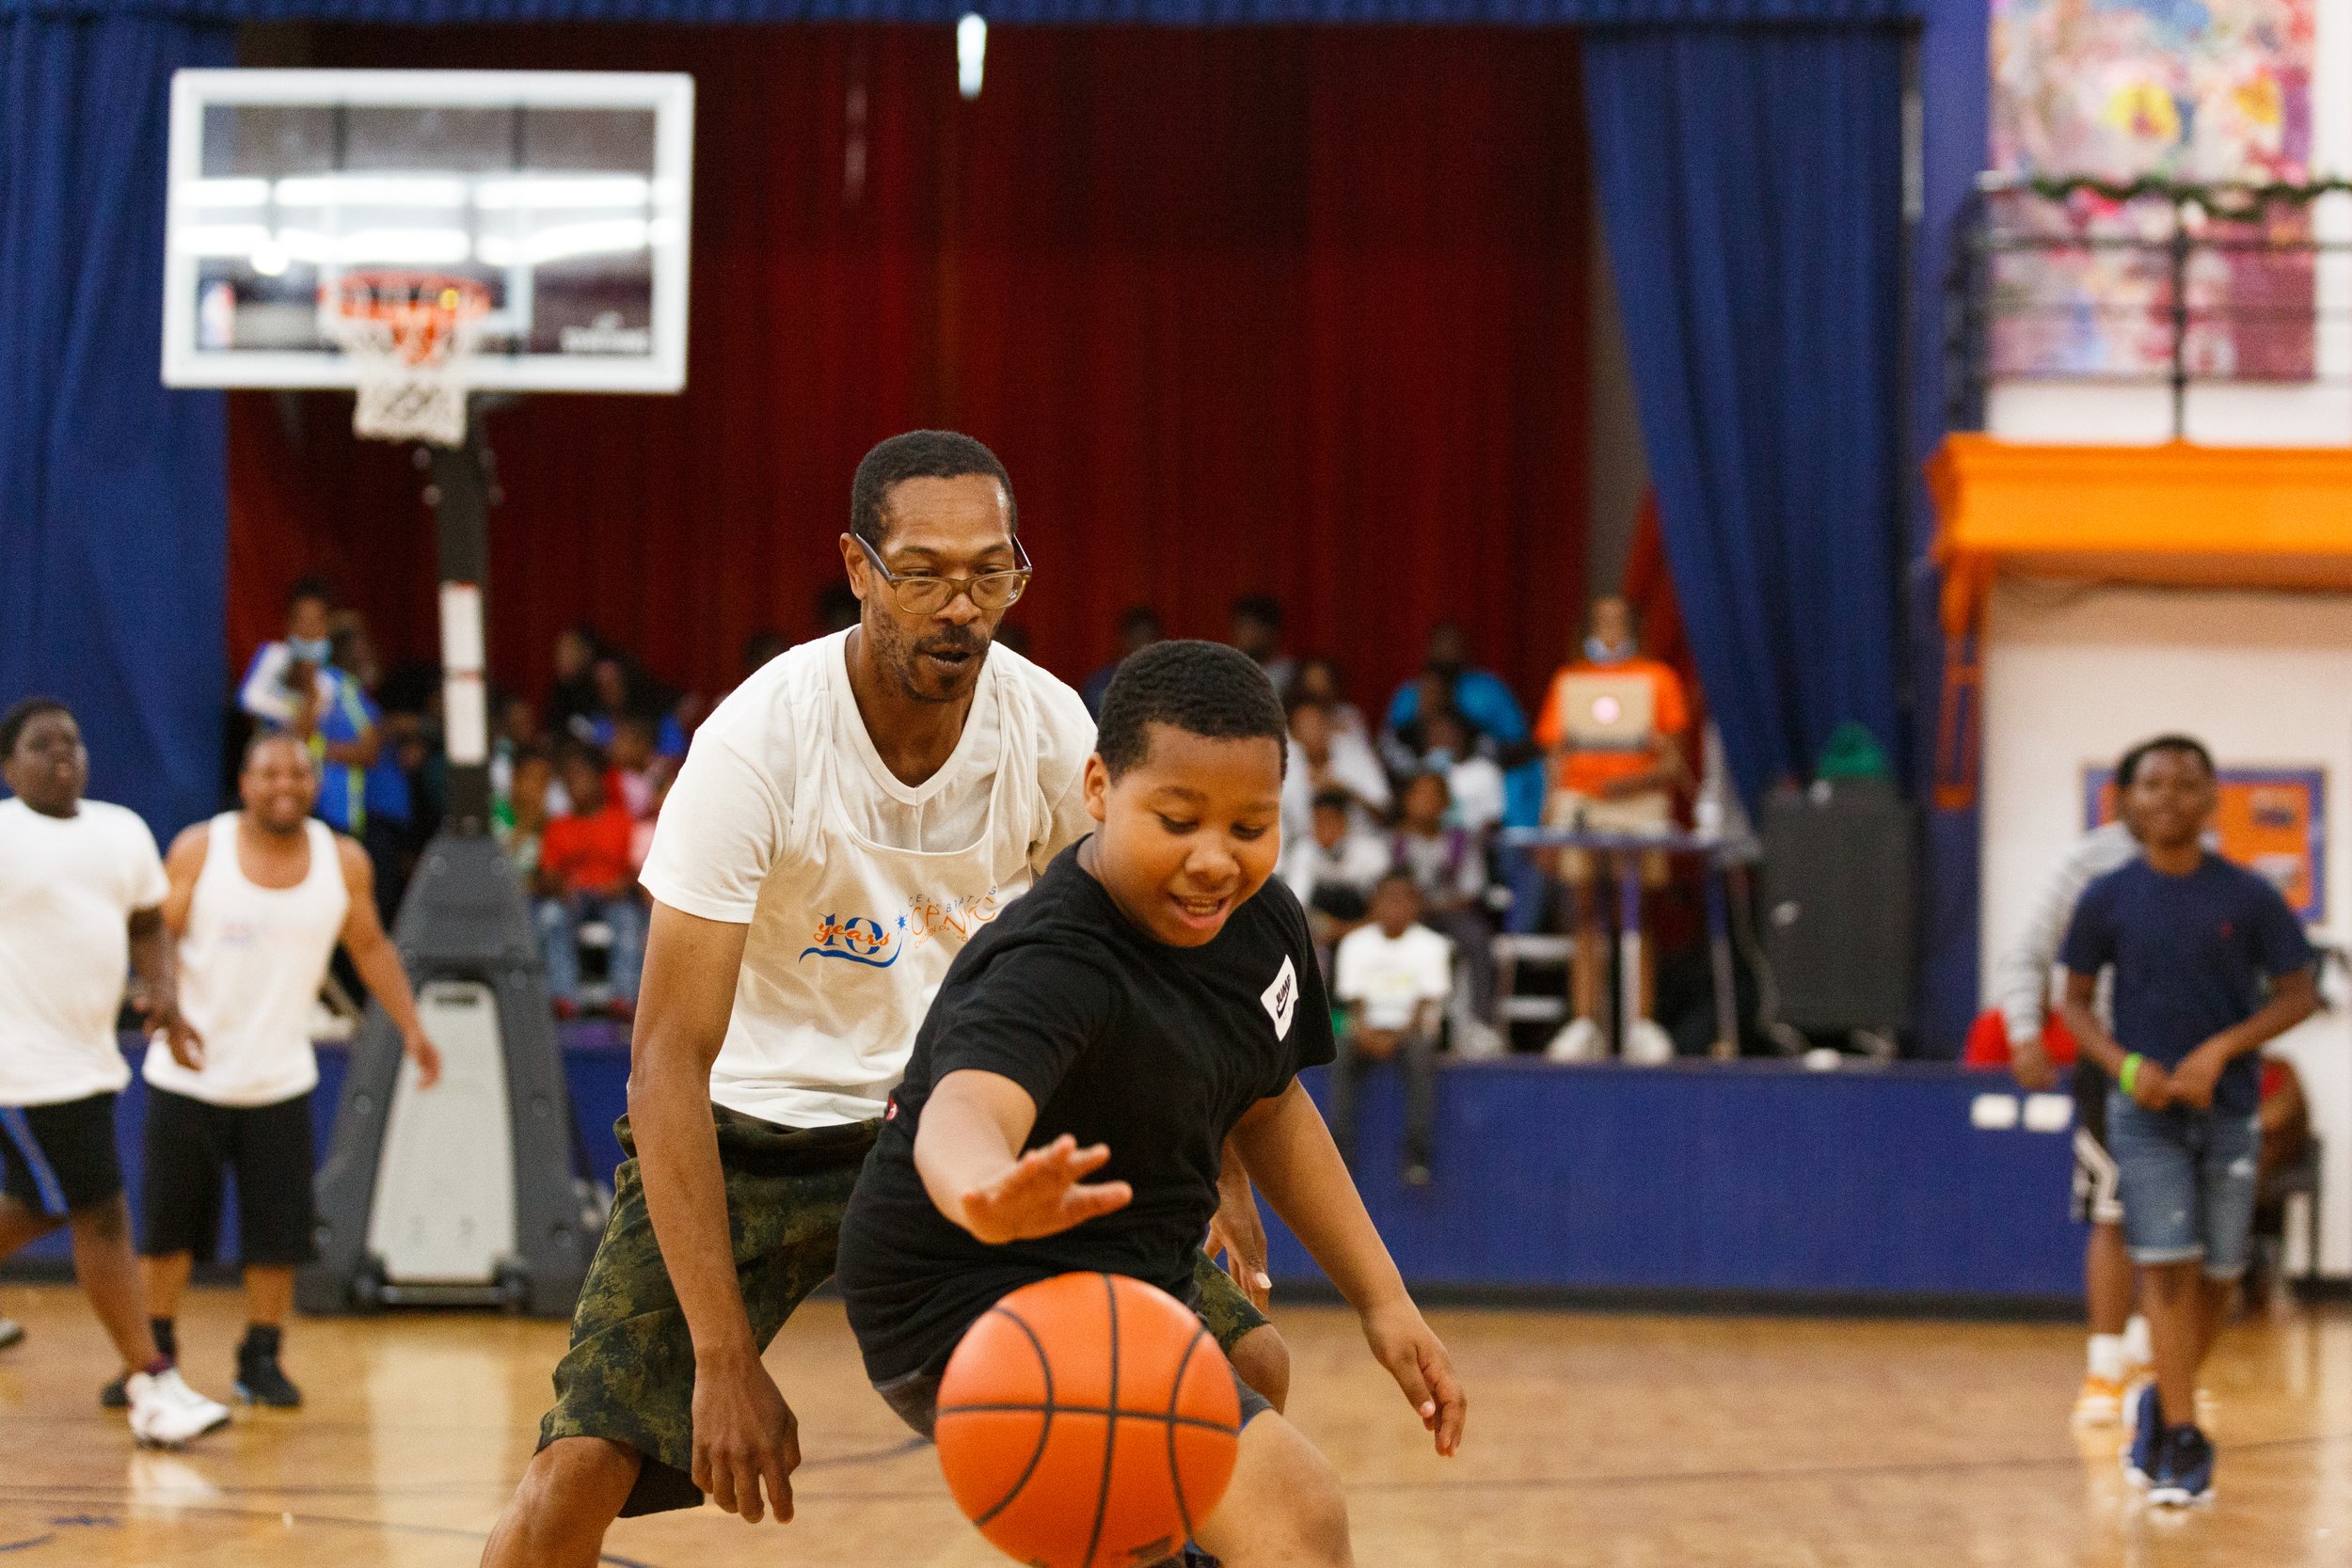 06172022_PF_CPNYC_Father's_Day_Basketball_12.jpg